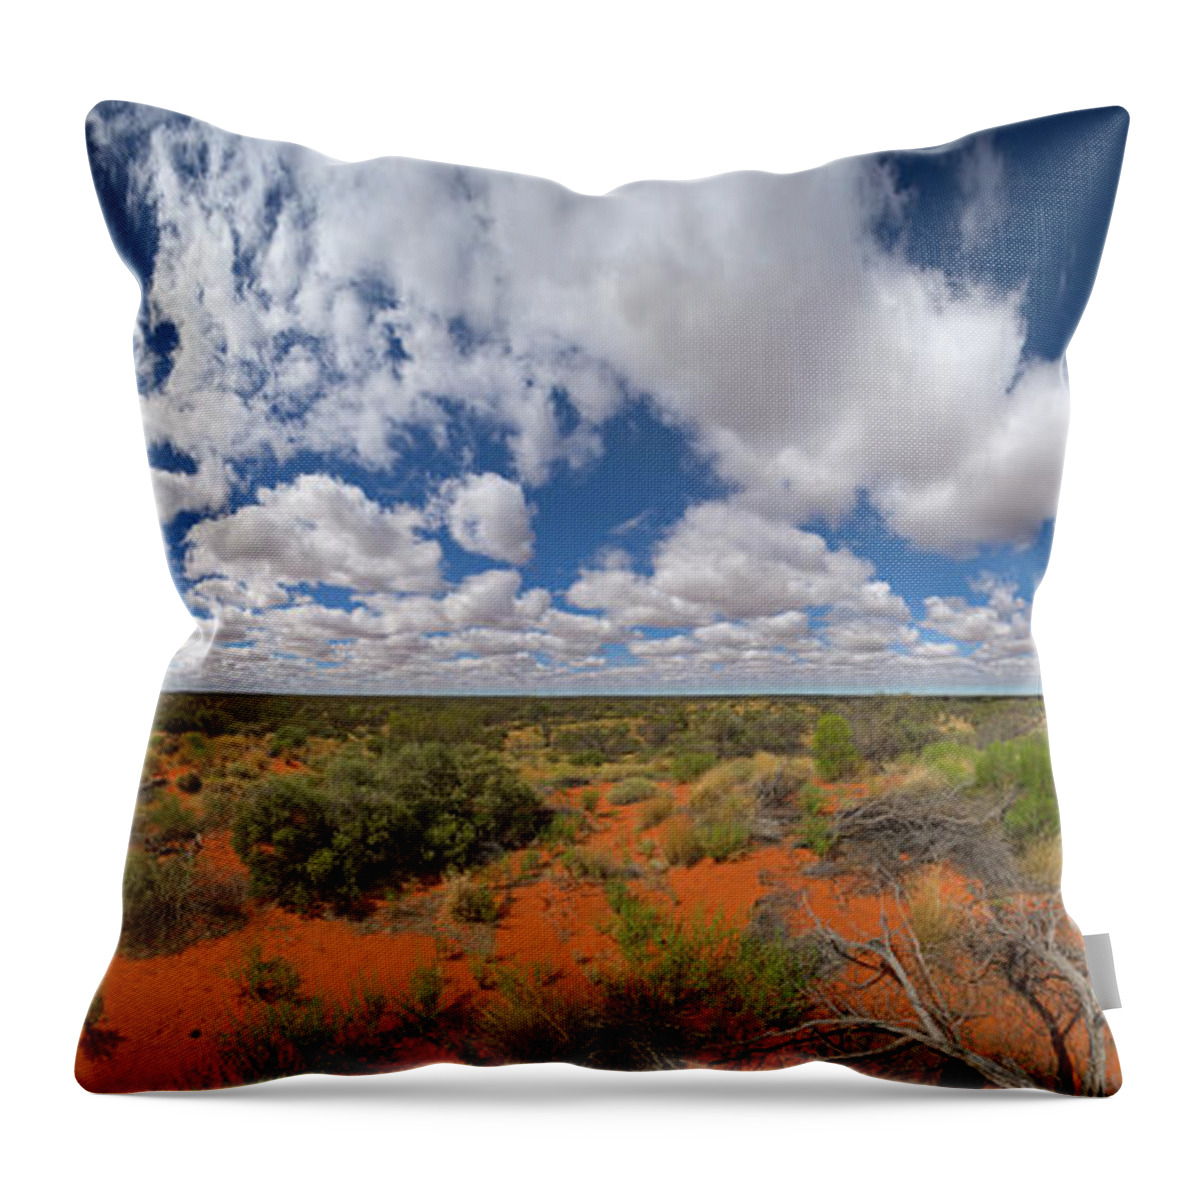 00477470 Throw Pillow featuring the photograph 360 of Clouds over Desert by Yva Momatiuk John Eastcott